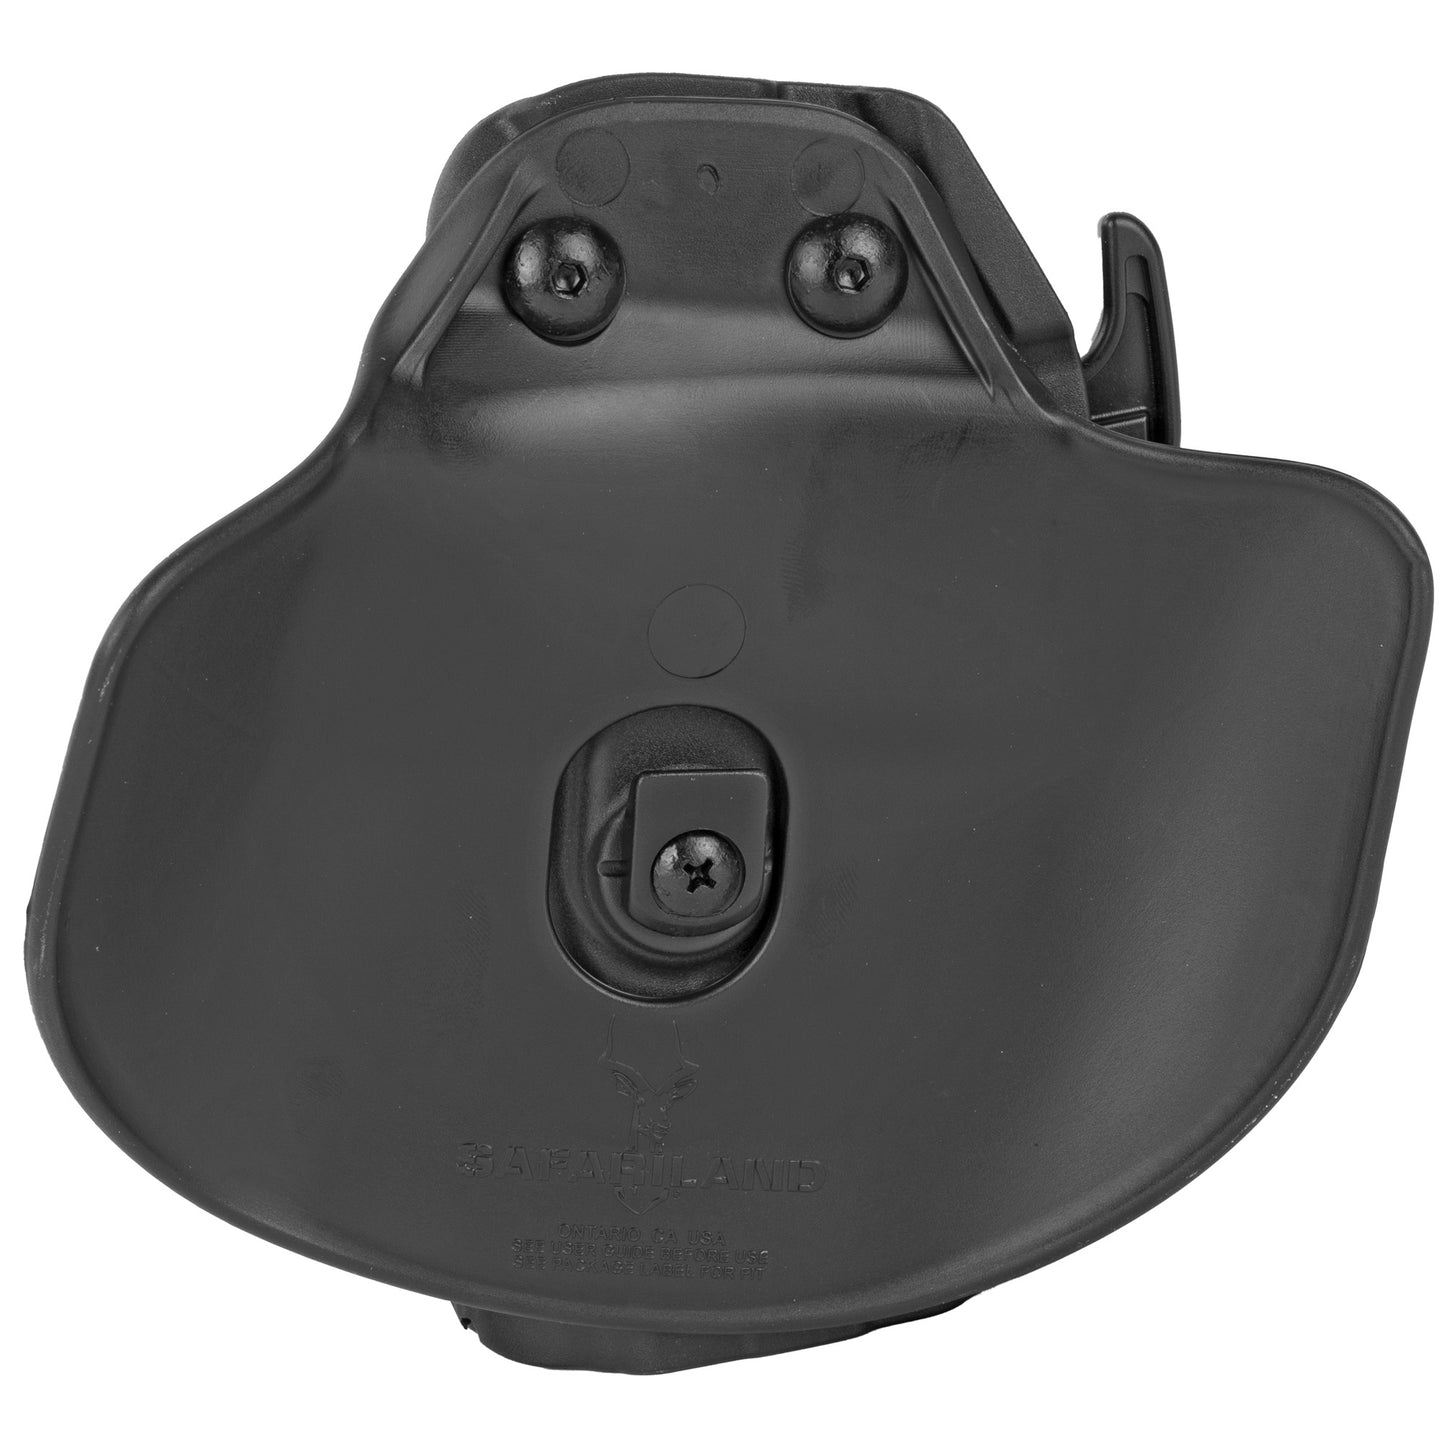 Safariland 578 GLS Pro-Fit Holster Fits Compact Similar to Glock 19, 23) Right